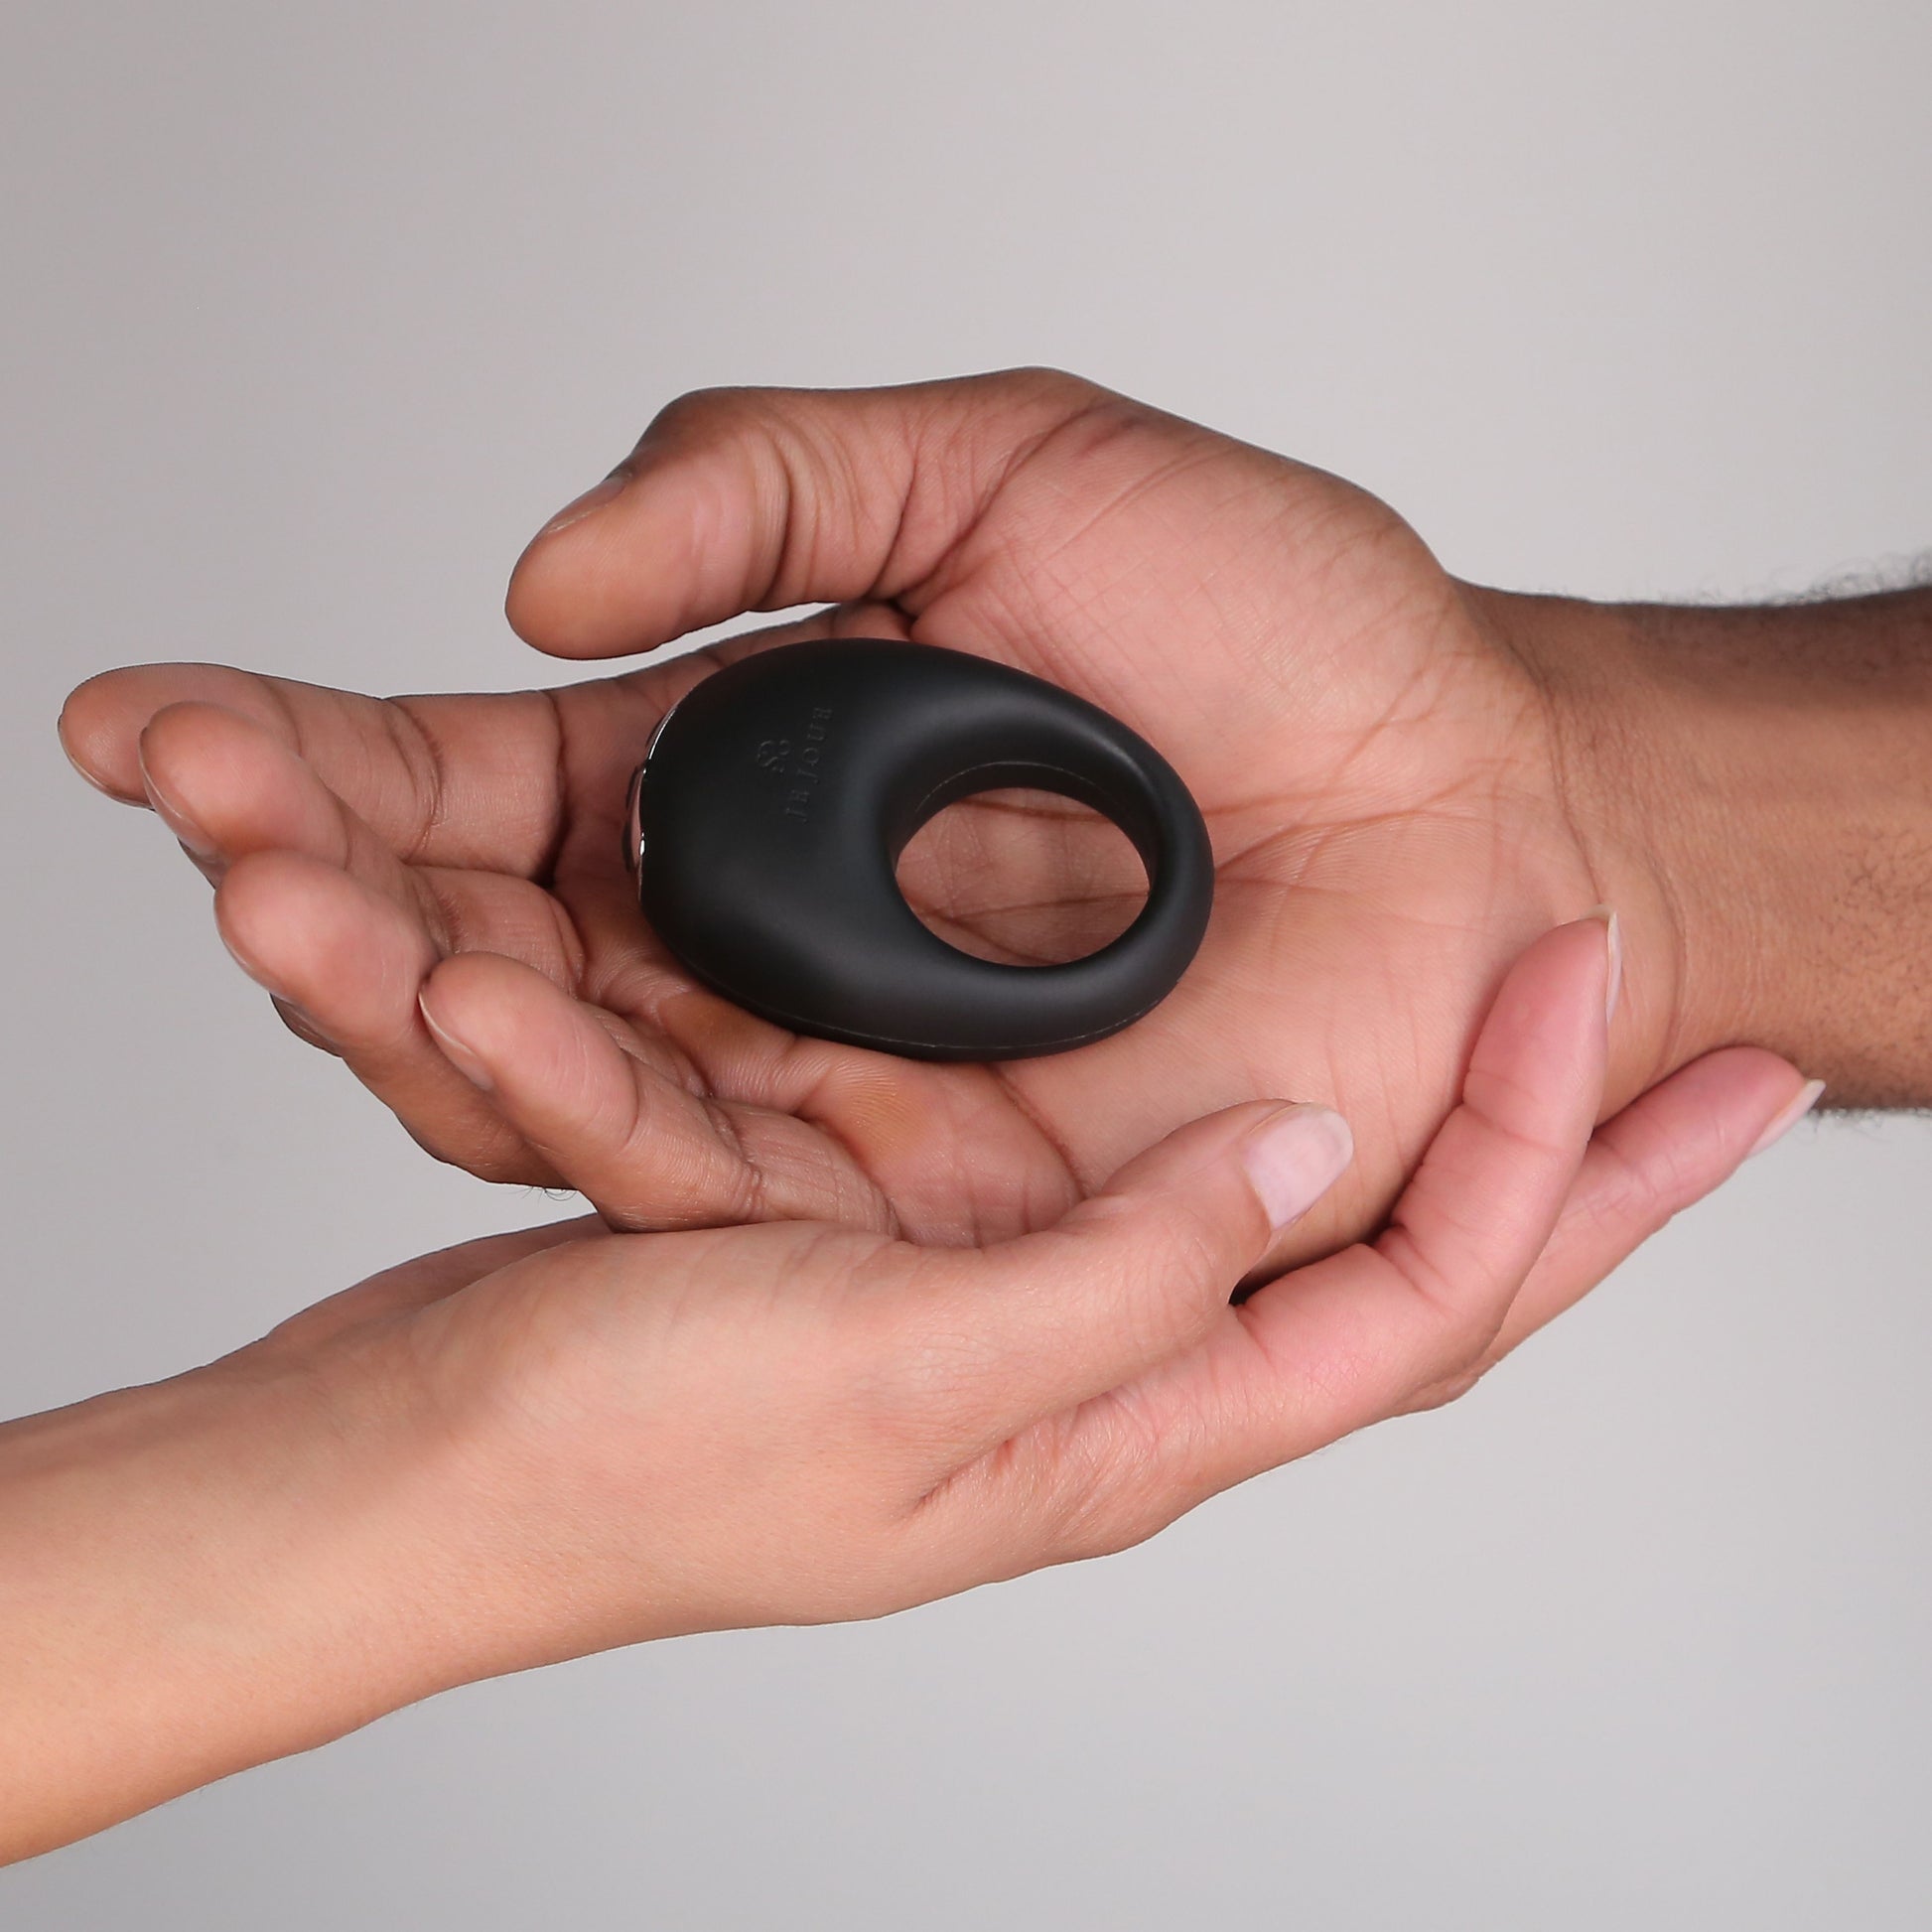 Hands holding Mio Vibrating Cock Ring